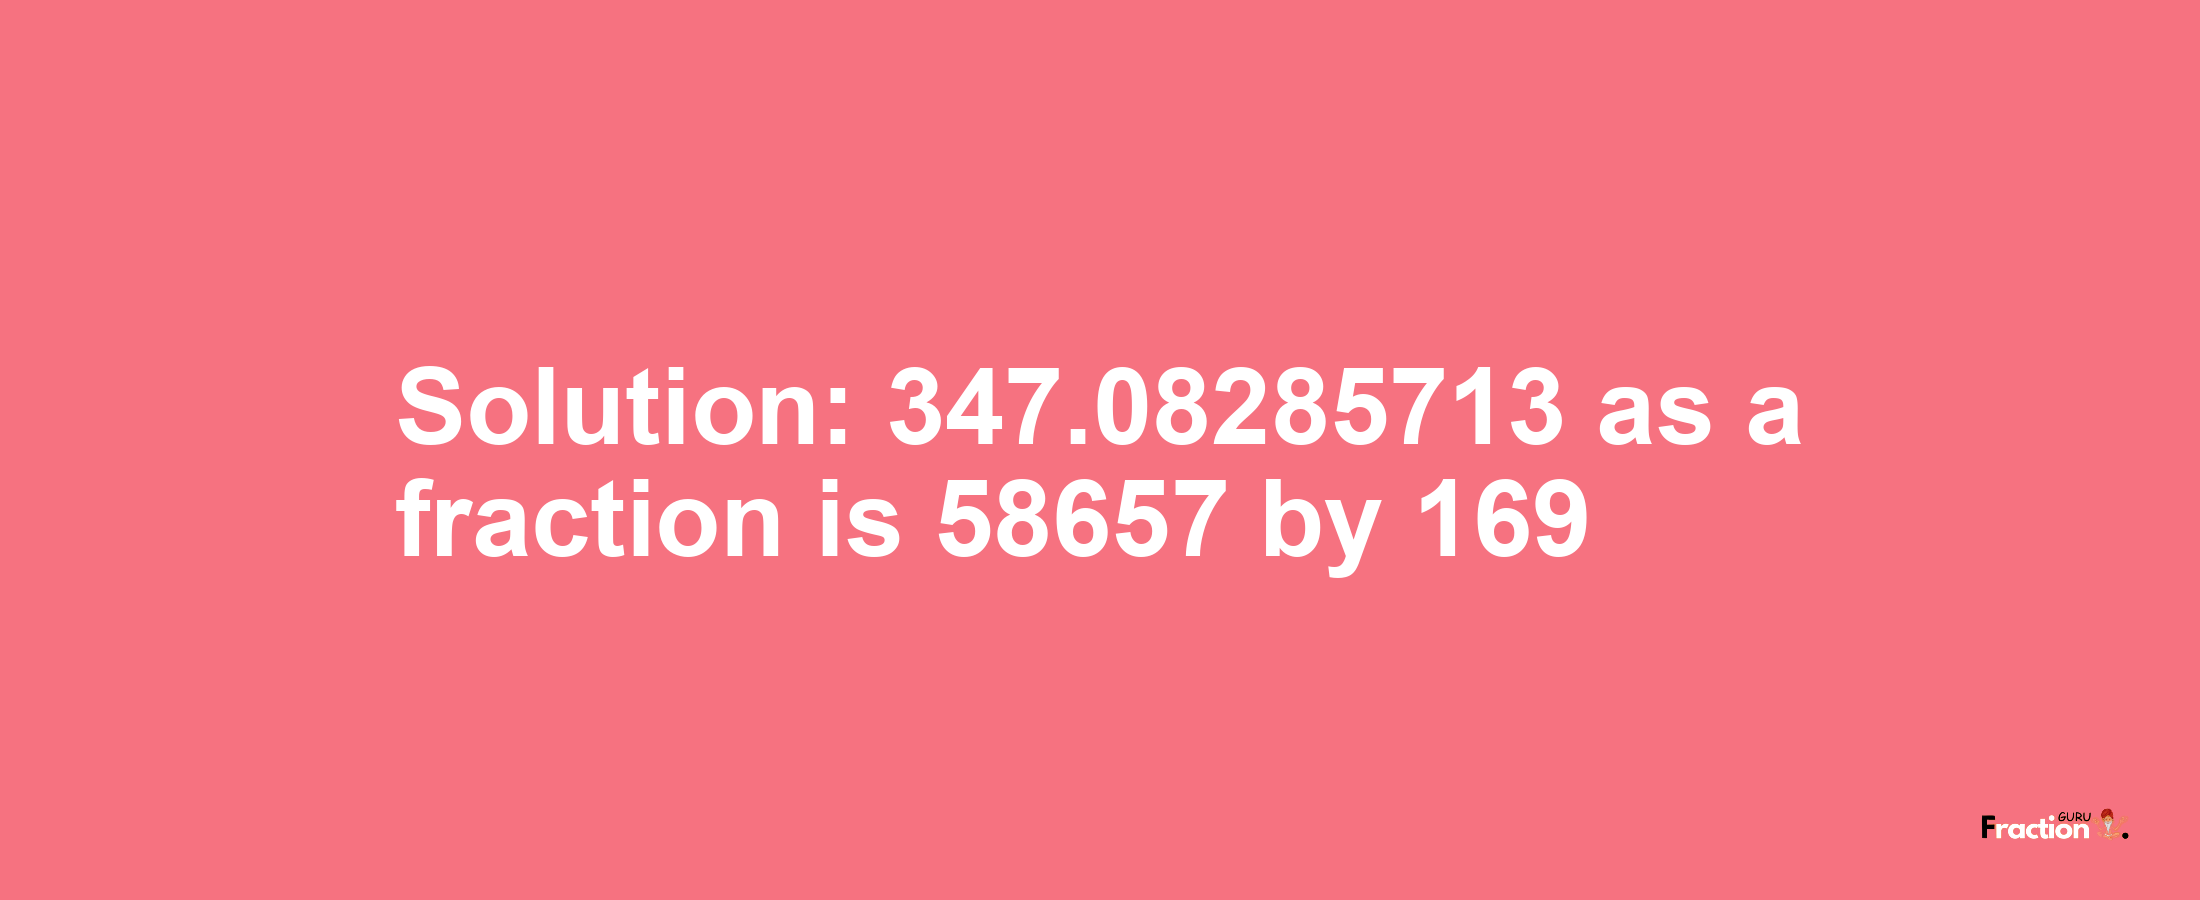 Solution:347.08285713 as a fraction is 58657/169